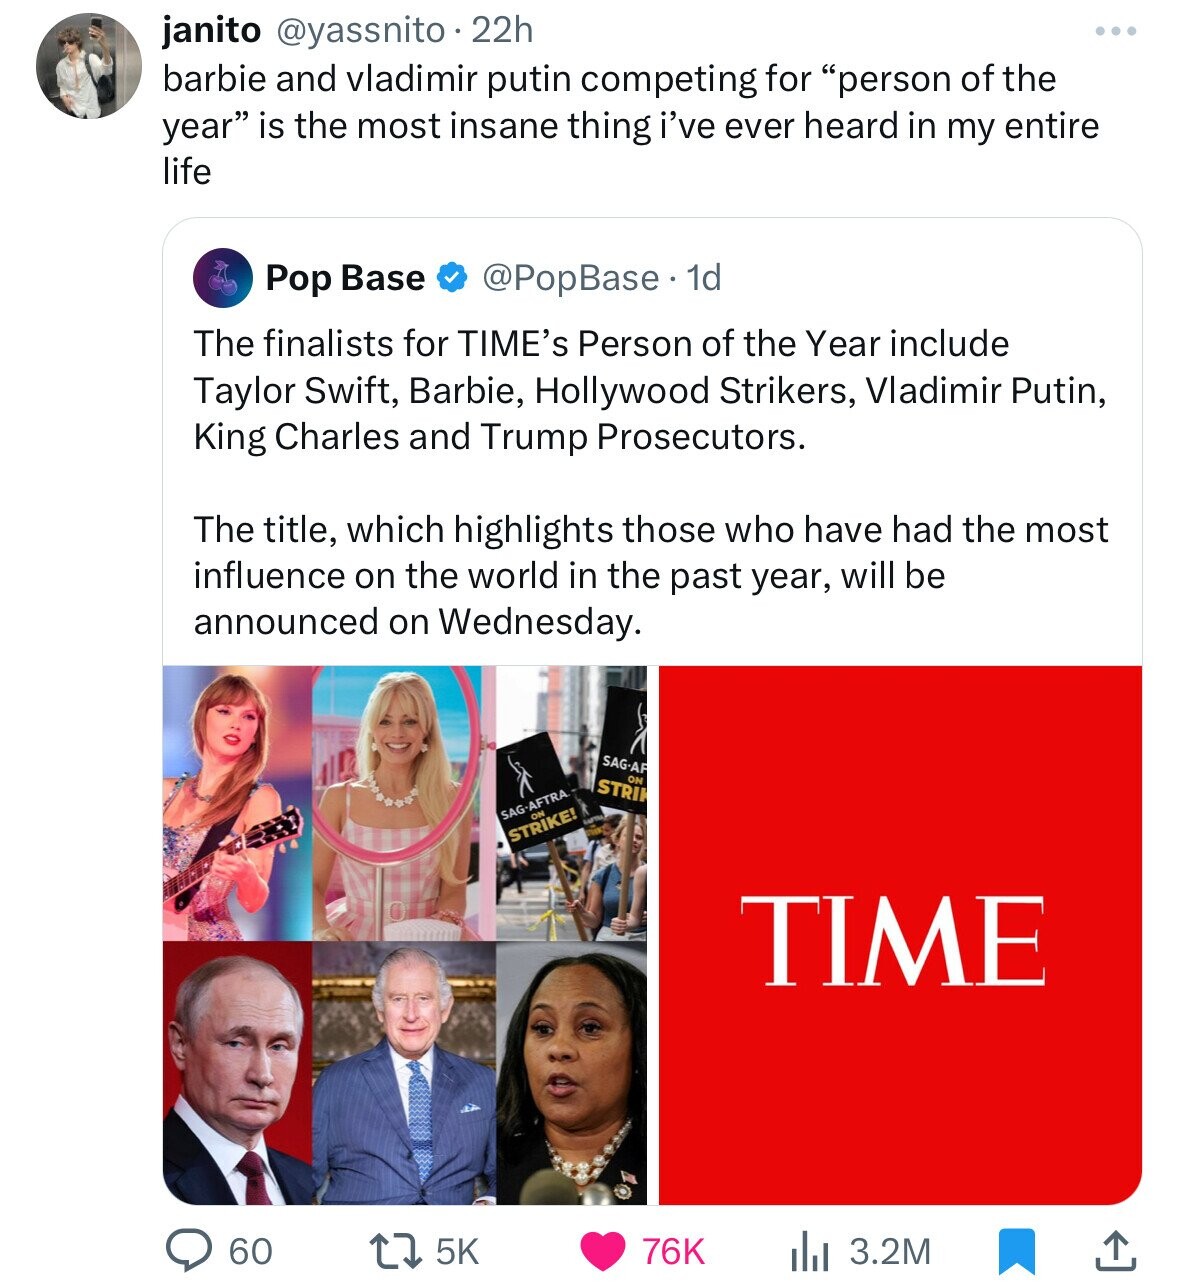 media - janito . 22h barbie and vladimir putin competing for "person of the year" is the most insane thing i've ever heard in my entire life Pop Base 1d The finalists for Time's Person of the Year include Taylor Swift, Barbie, Hollywood Strikers, Vladimir